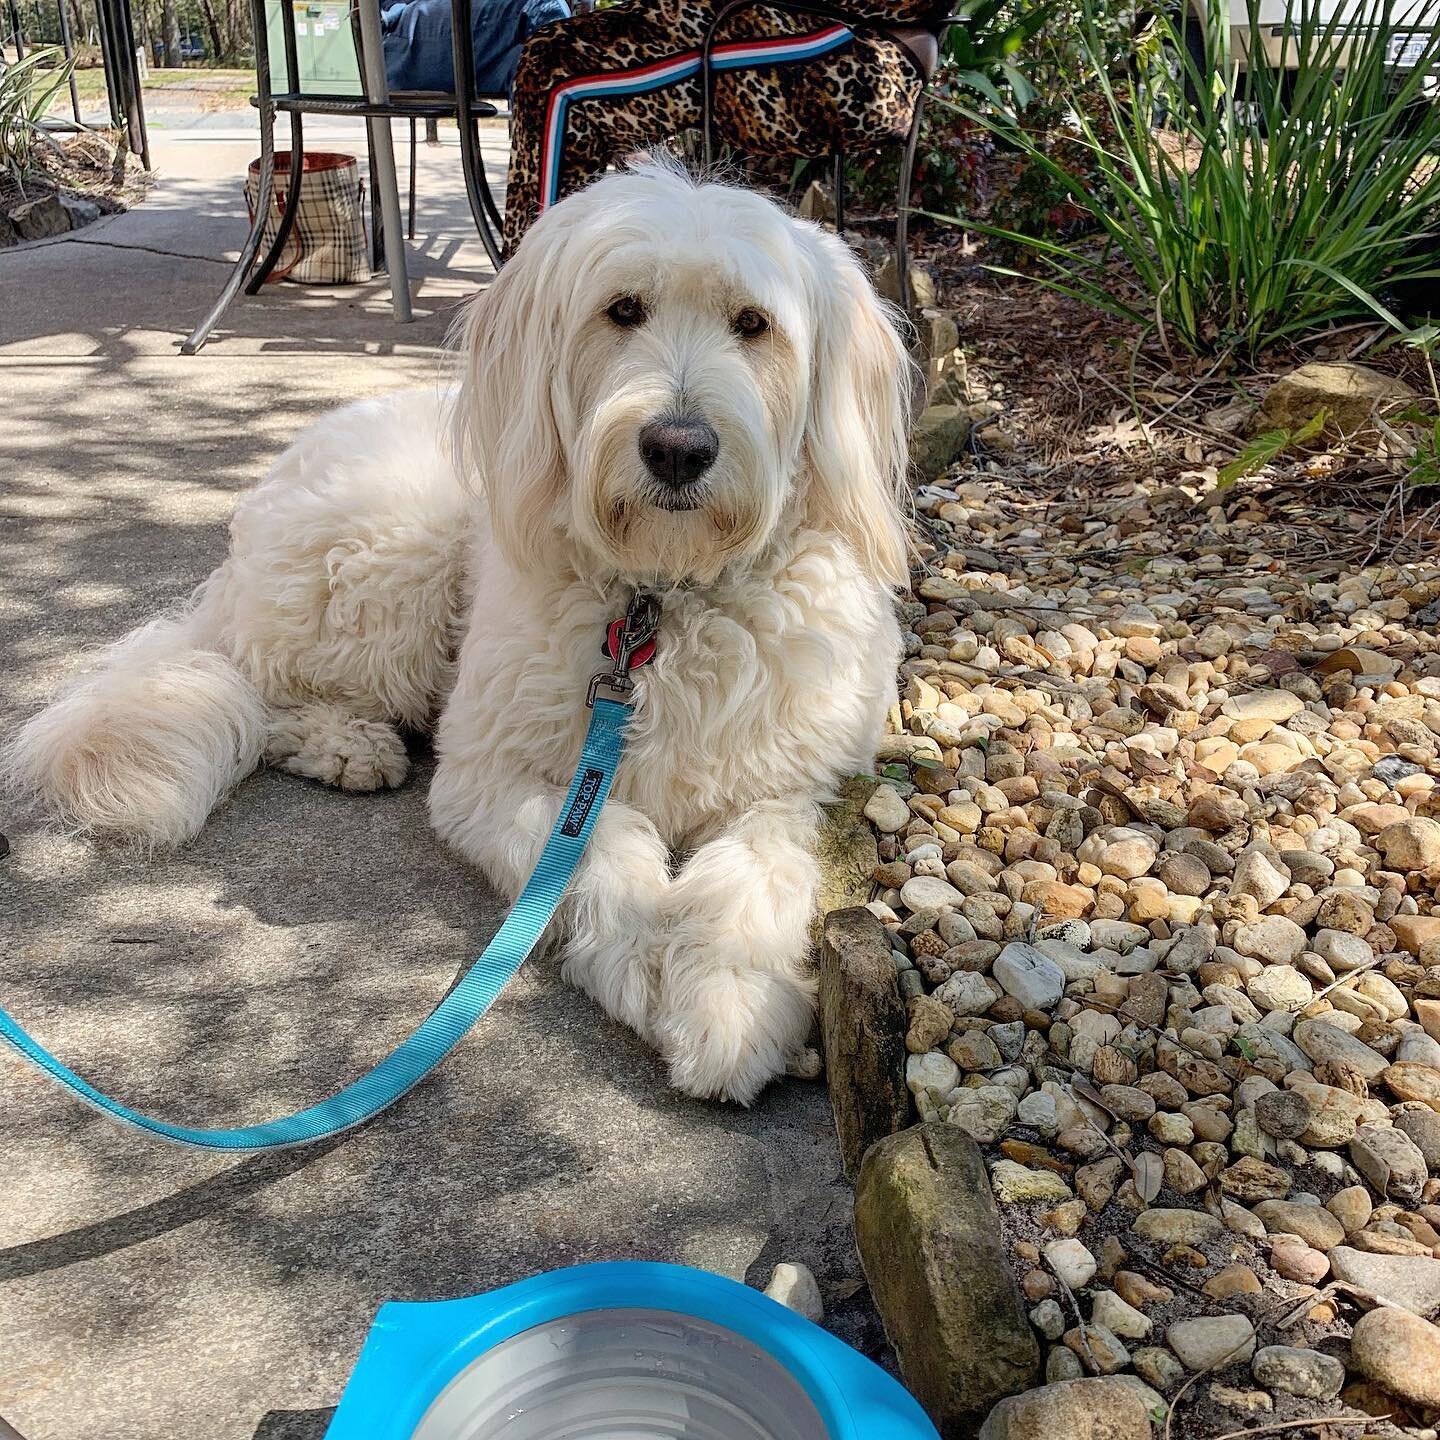 Nellie thinks that this weather is absolutely perfect for outdoor dining. We 100% agree.
.
10/10 would trust Nellie with lunch plans.
.
#alfrescodining 
#eatlocal
#dogsofinstagram